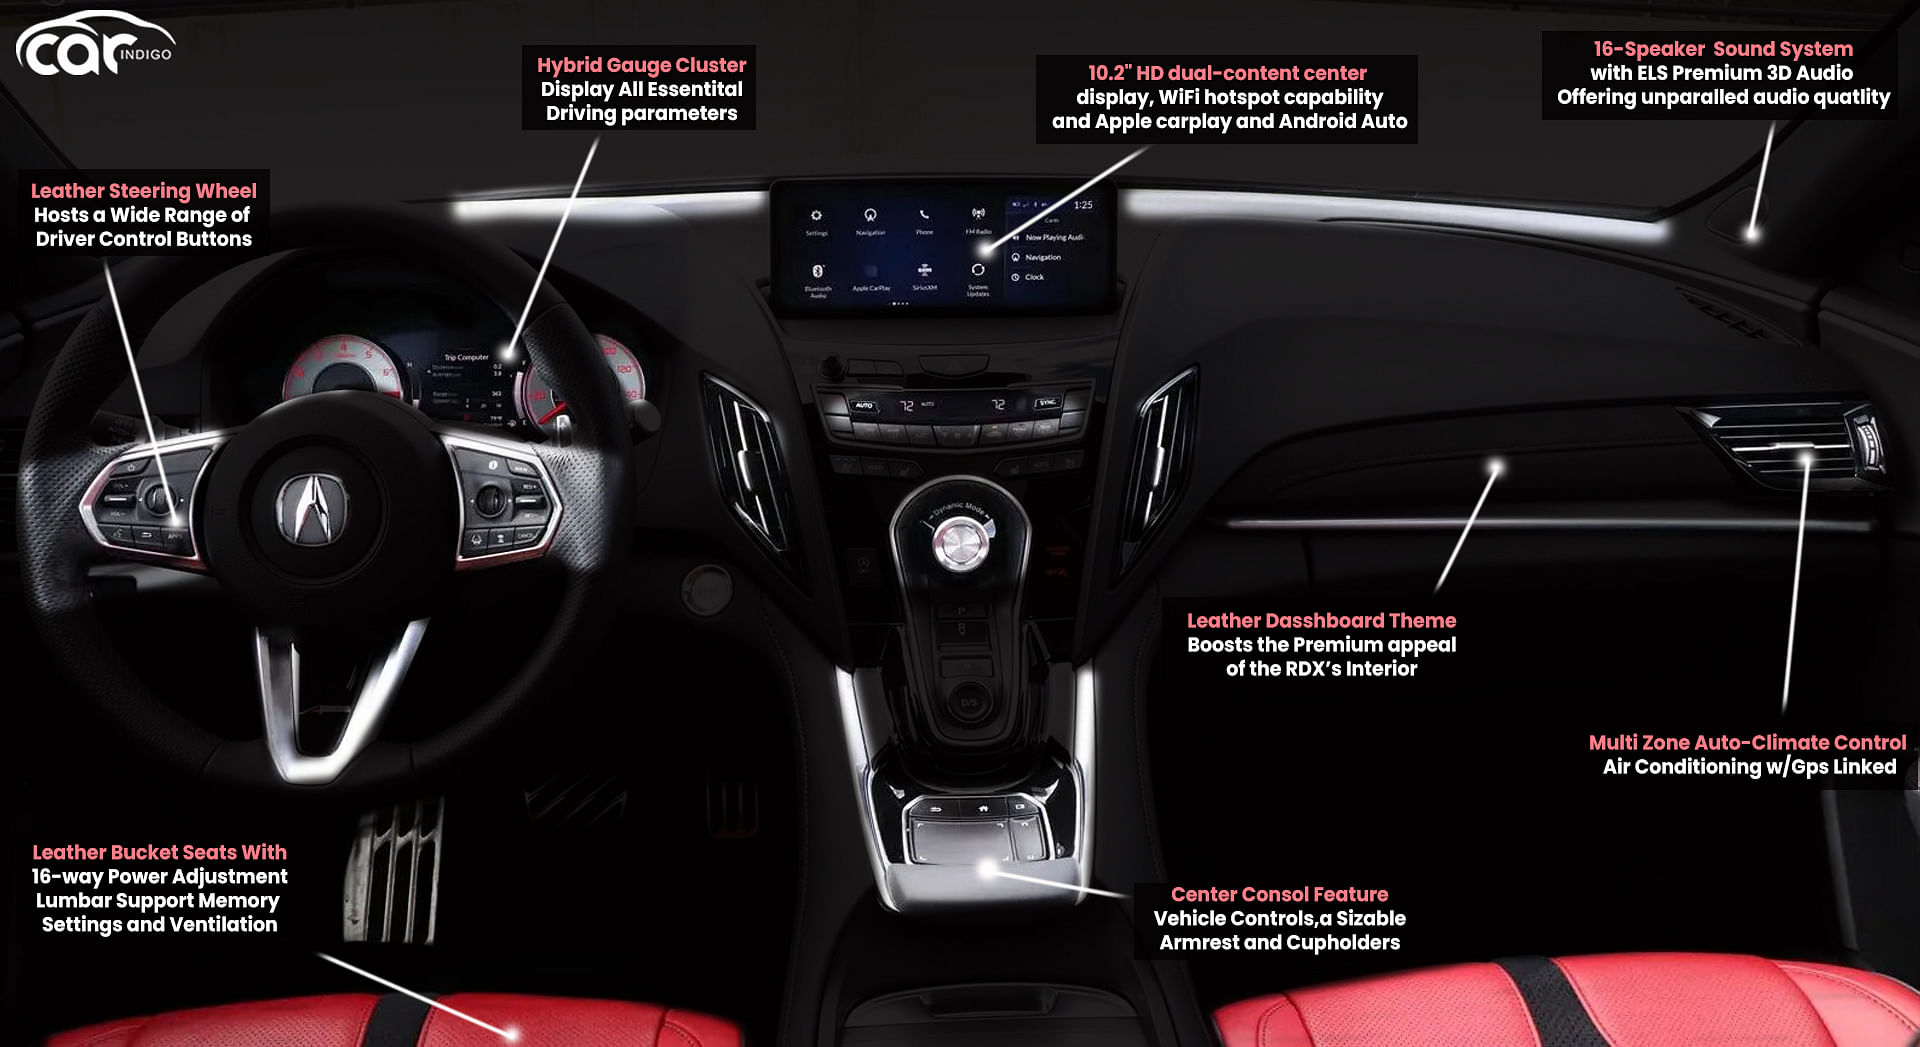 2021 Acura Rdx Interior Review Seating Infotainment Dashboard And